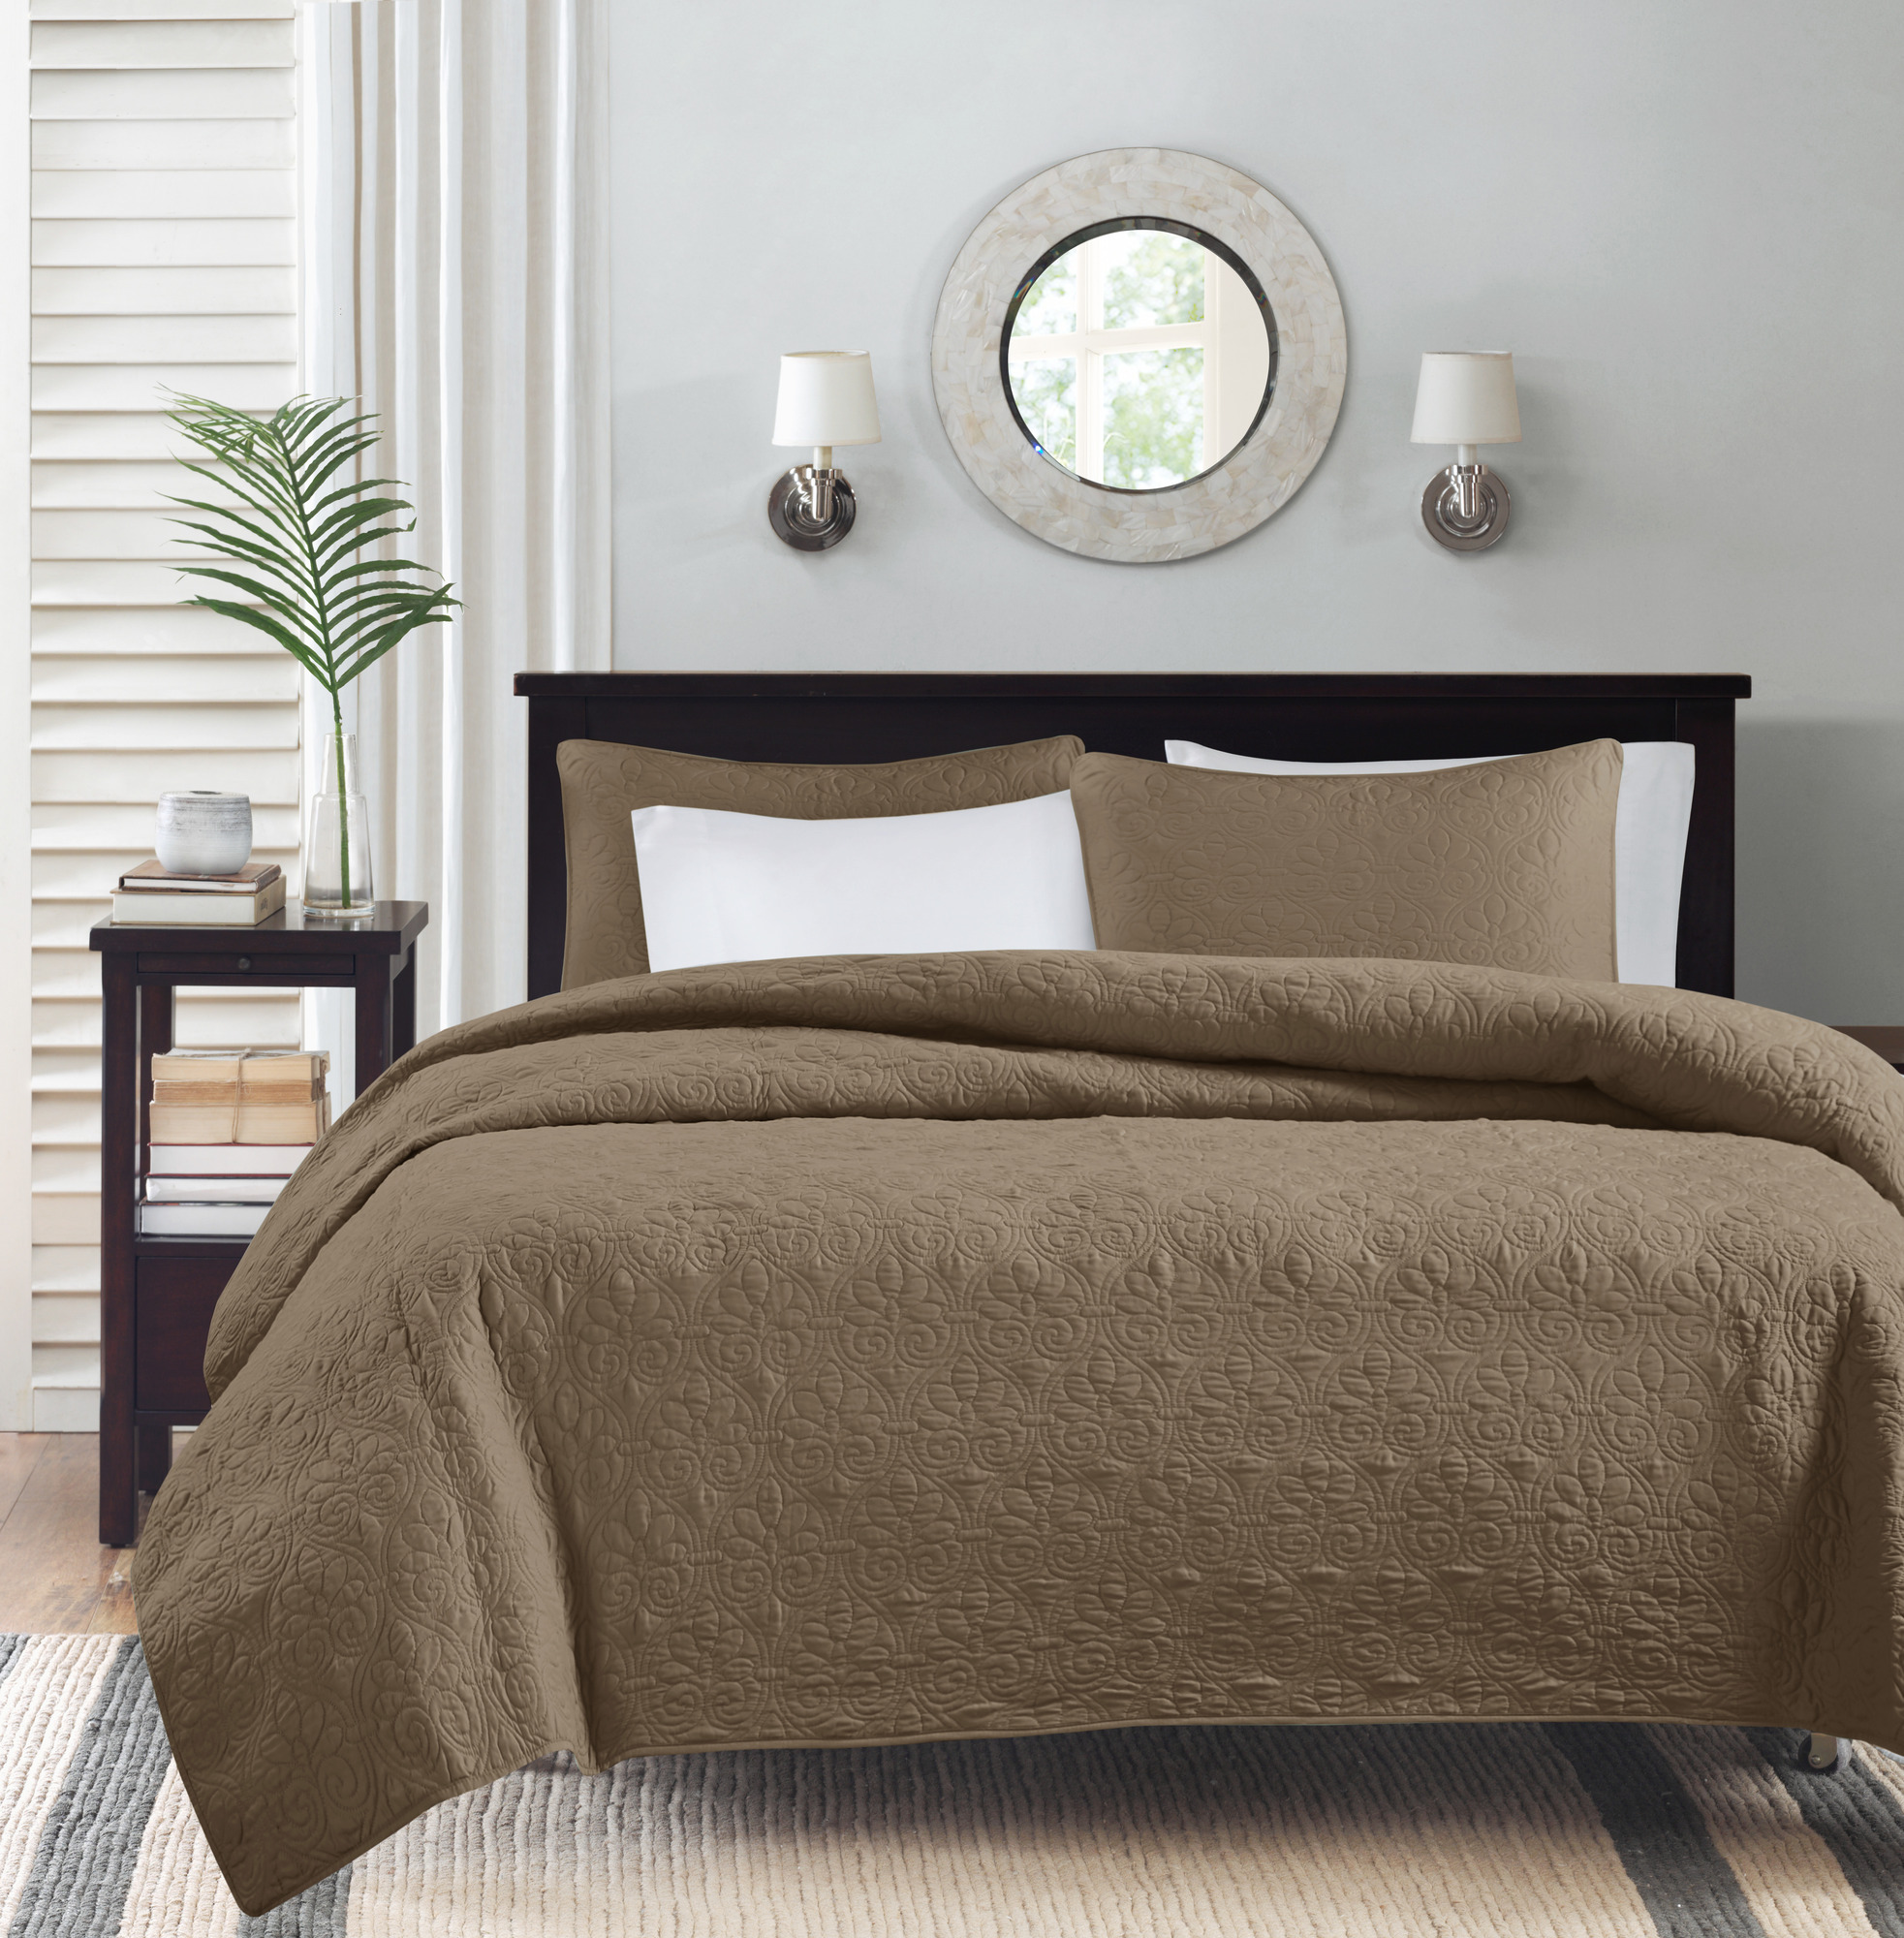 Home Essence Vancouver Super Soft Reversible Coverlet Set, Brown, Twin/Twin XL - image 3 of 12